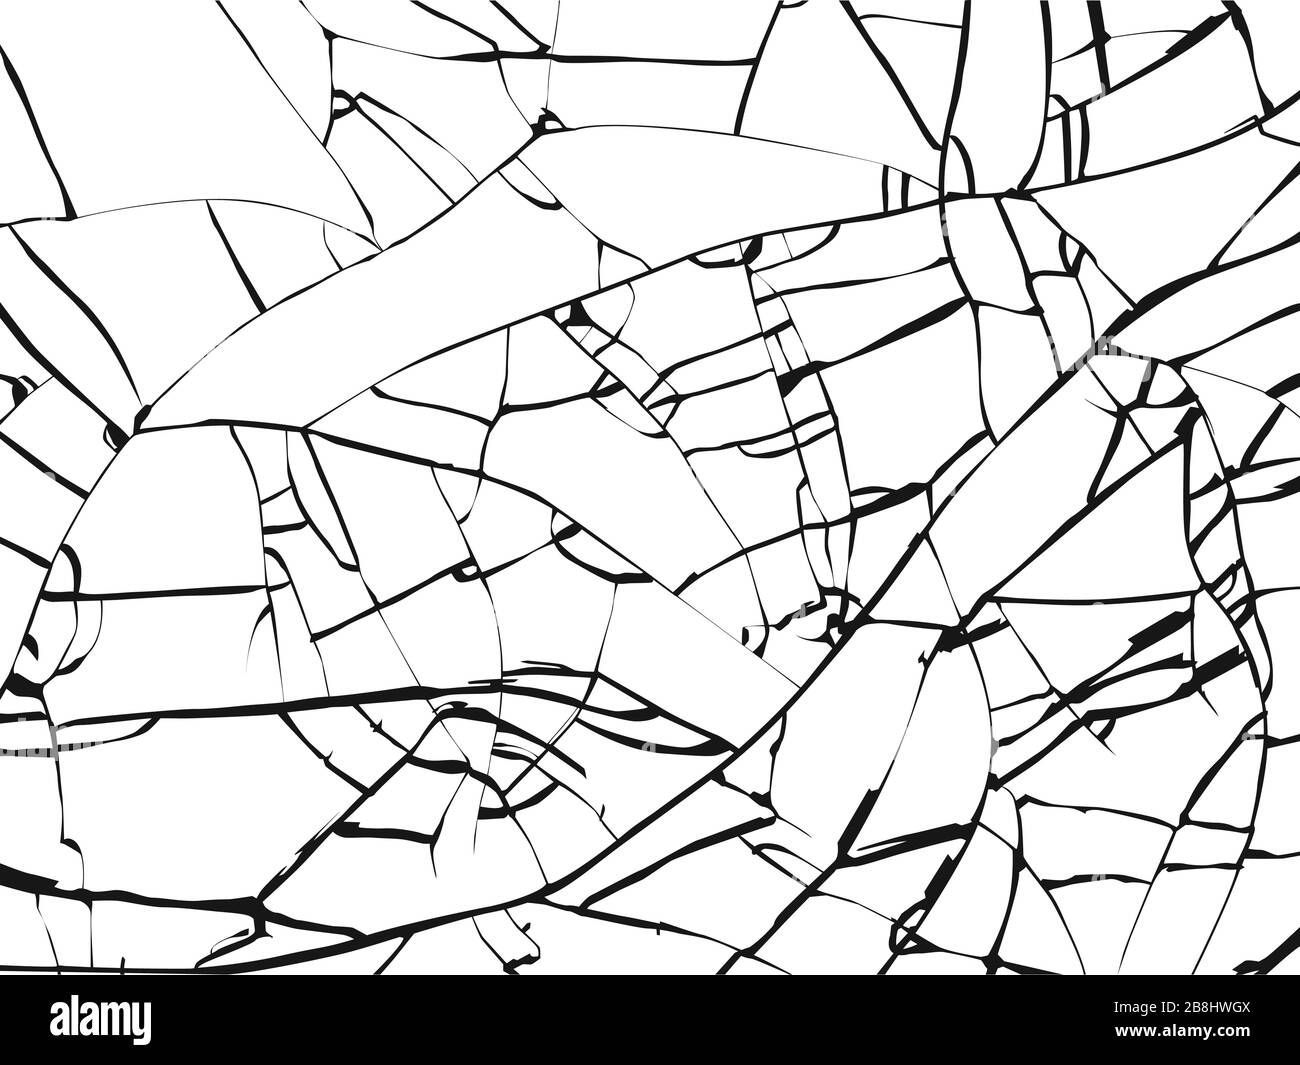 Shattering Window Glass Stock Photo - Download Image Now